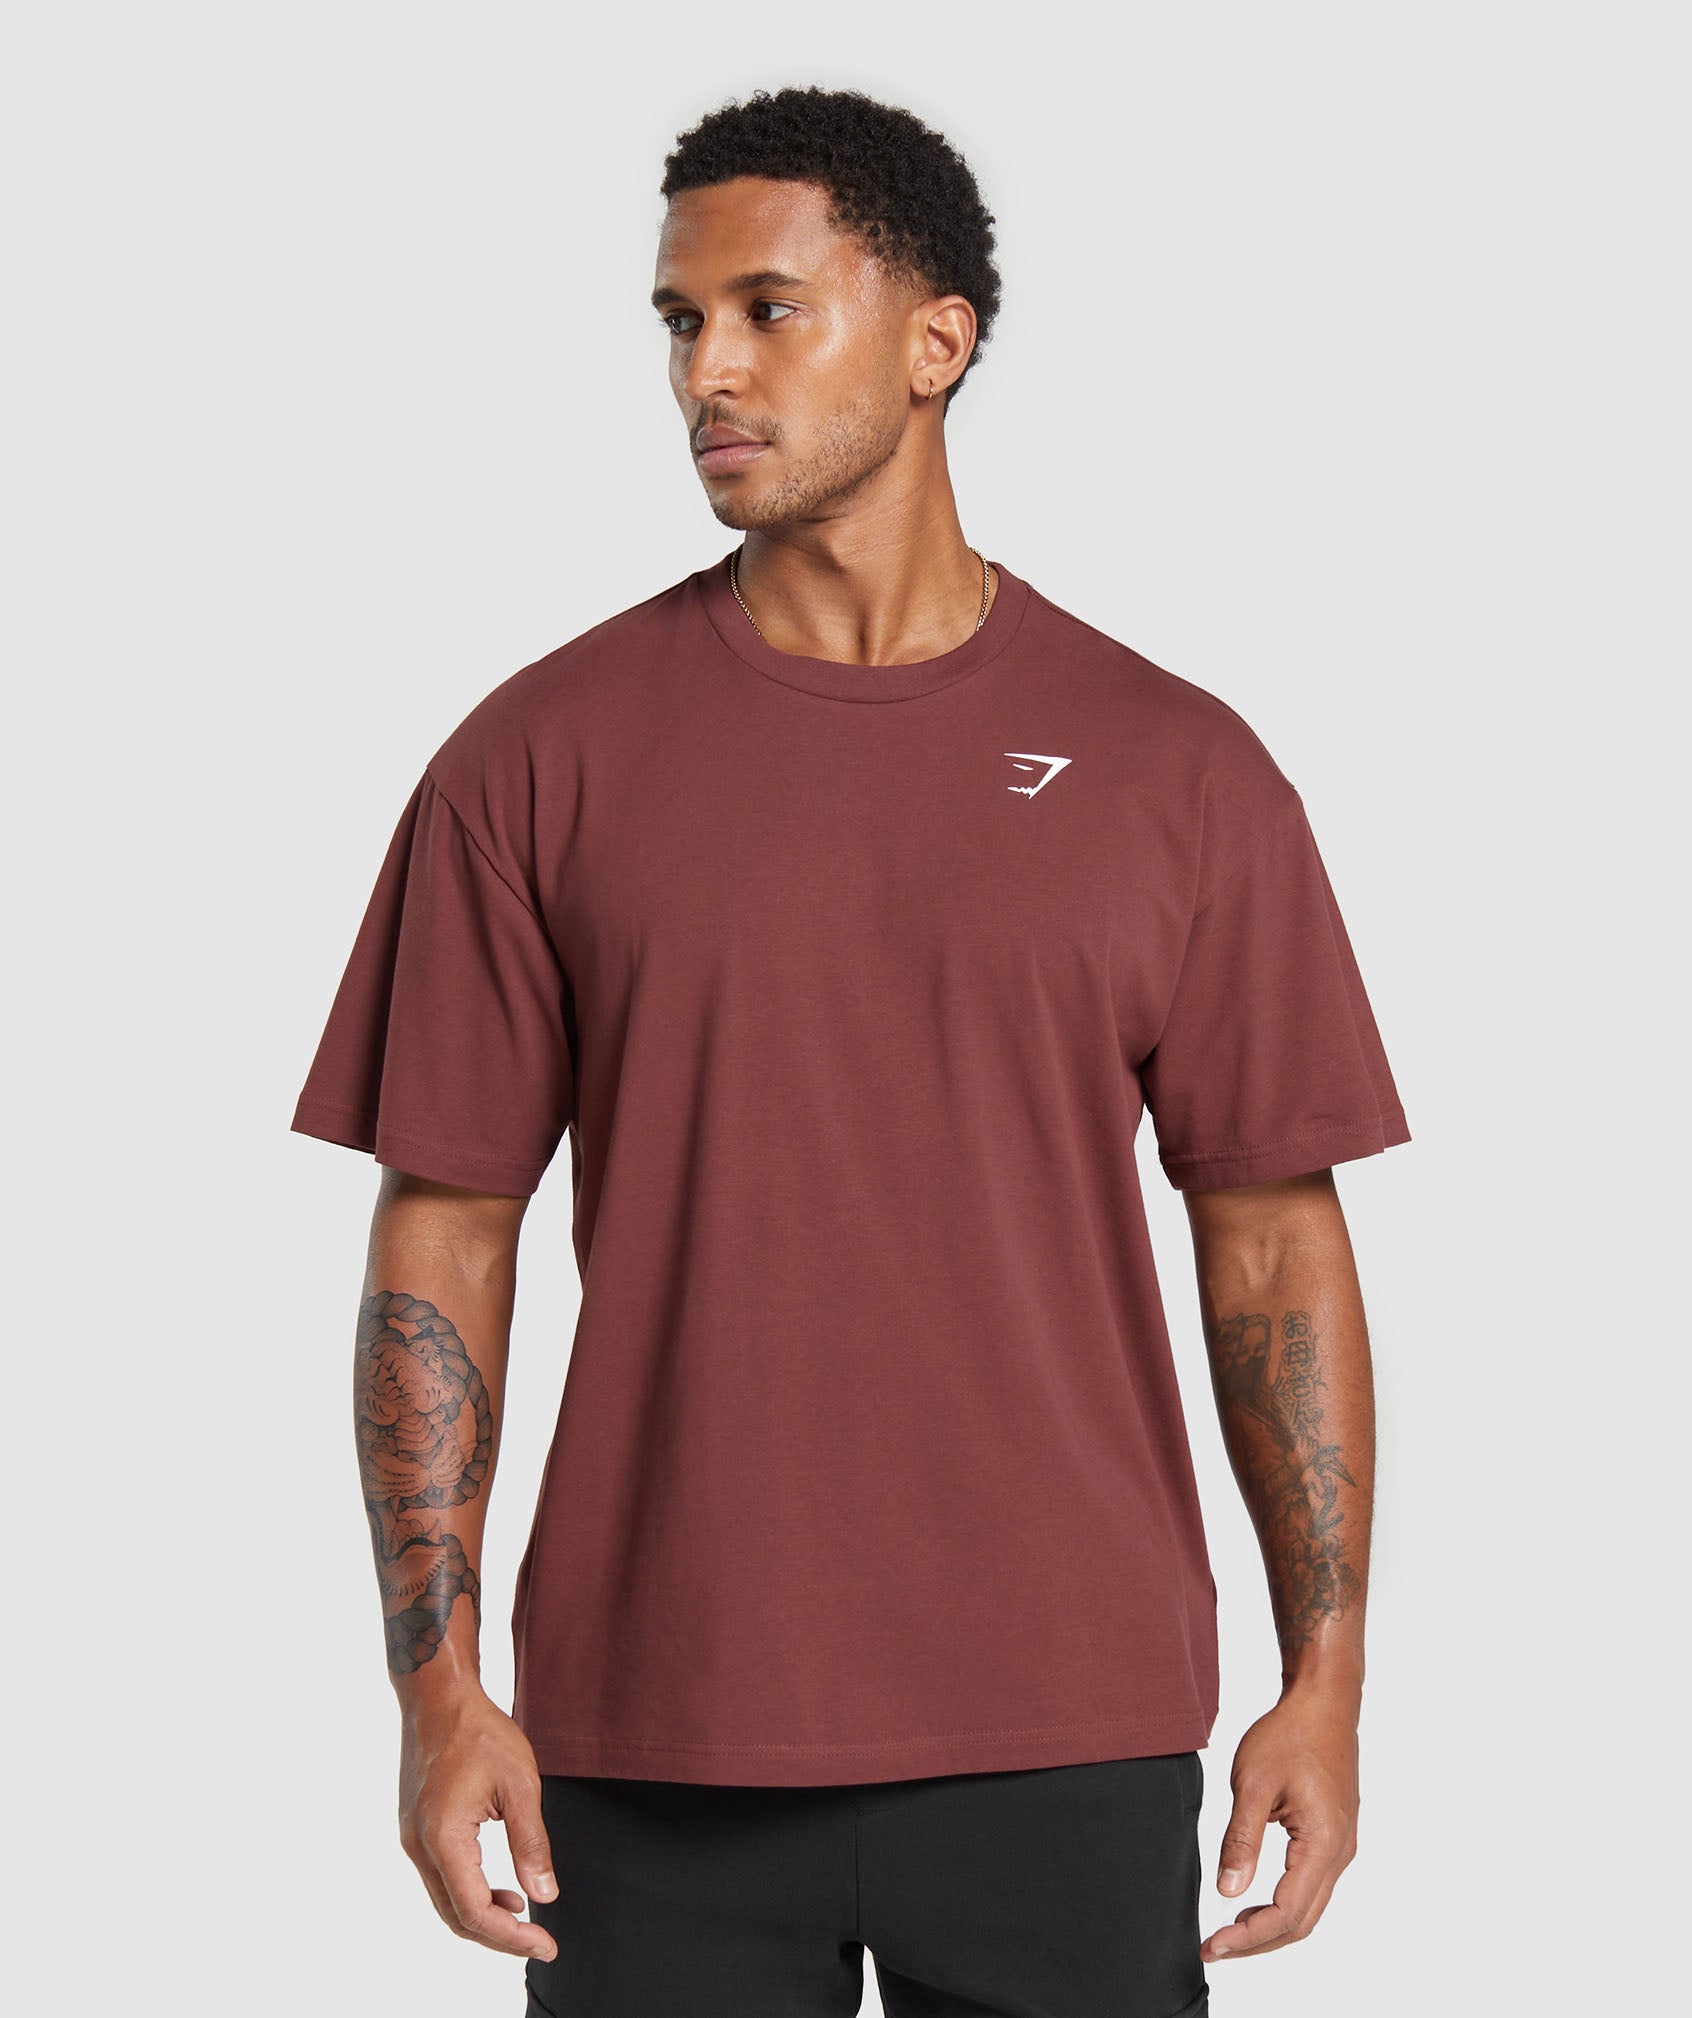 Essential Oversized T-Shirt in Burgundy Brown